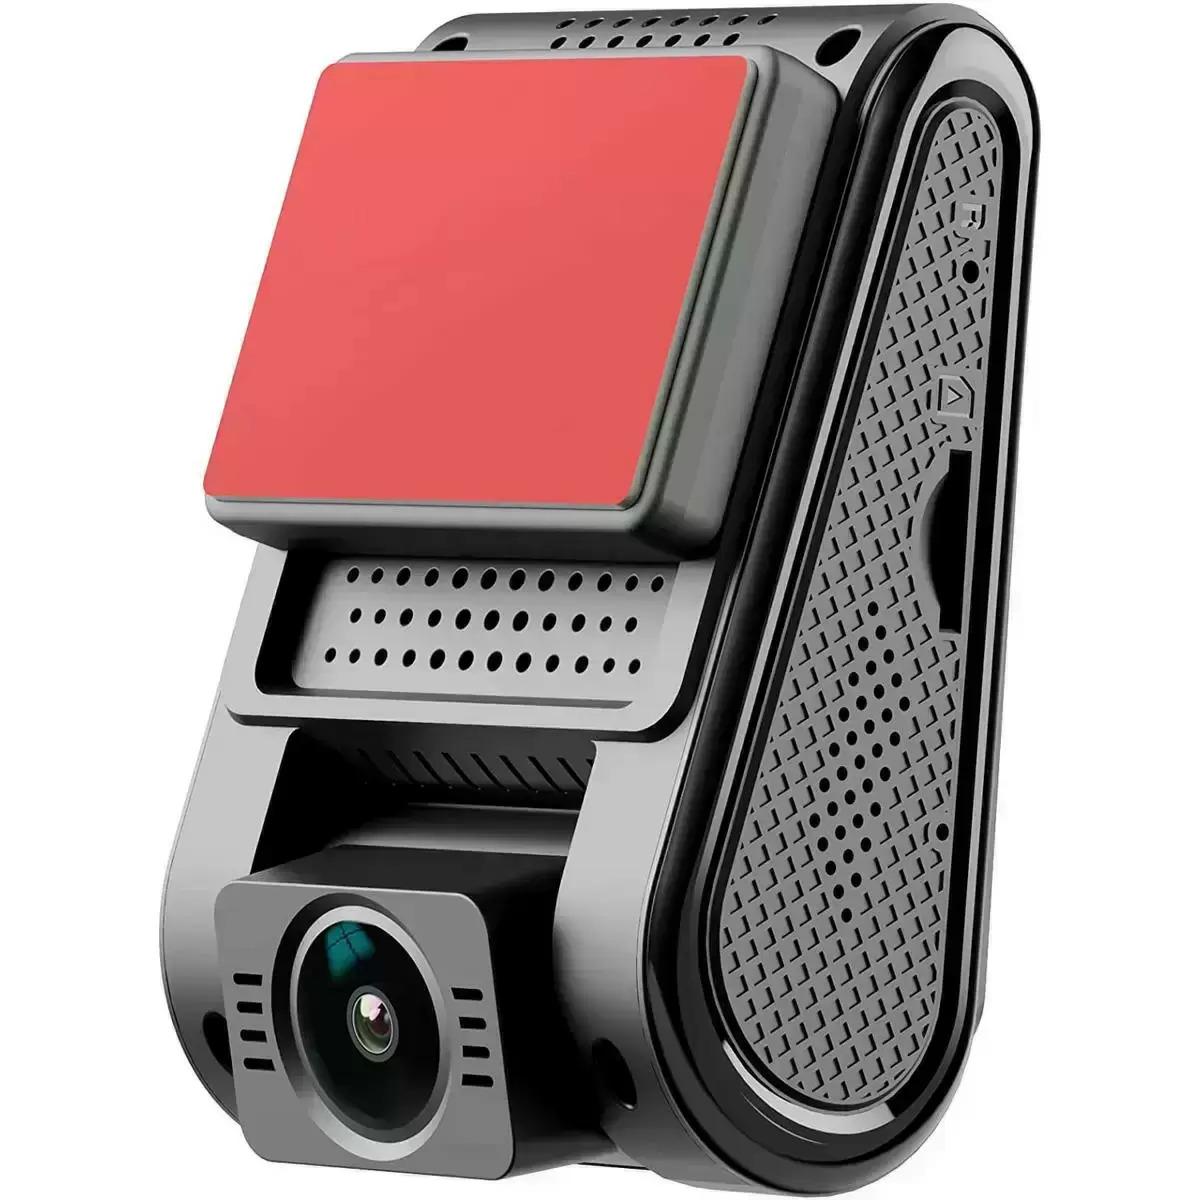 Viofo A119 V3 1440p HDR Dash Cam with GPS for $79.90 Shipped